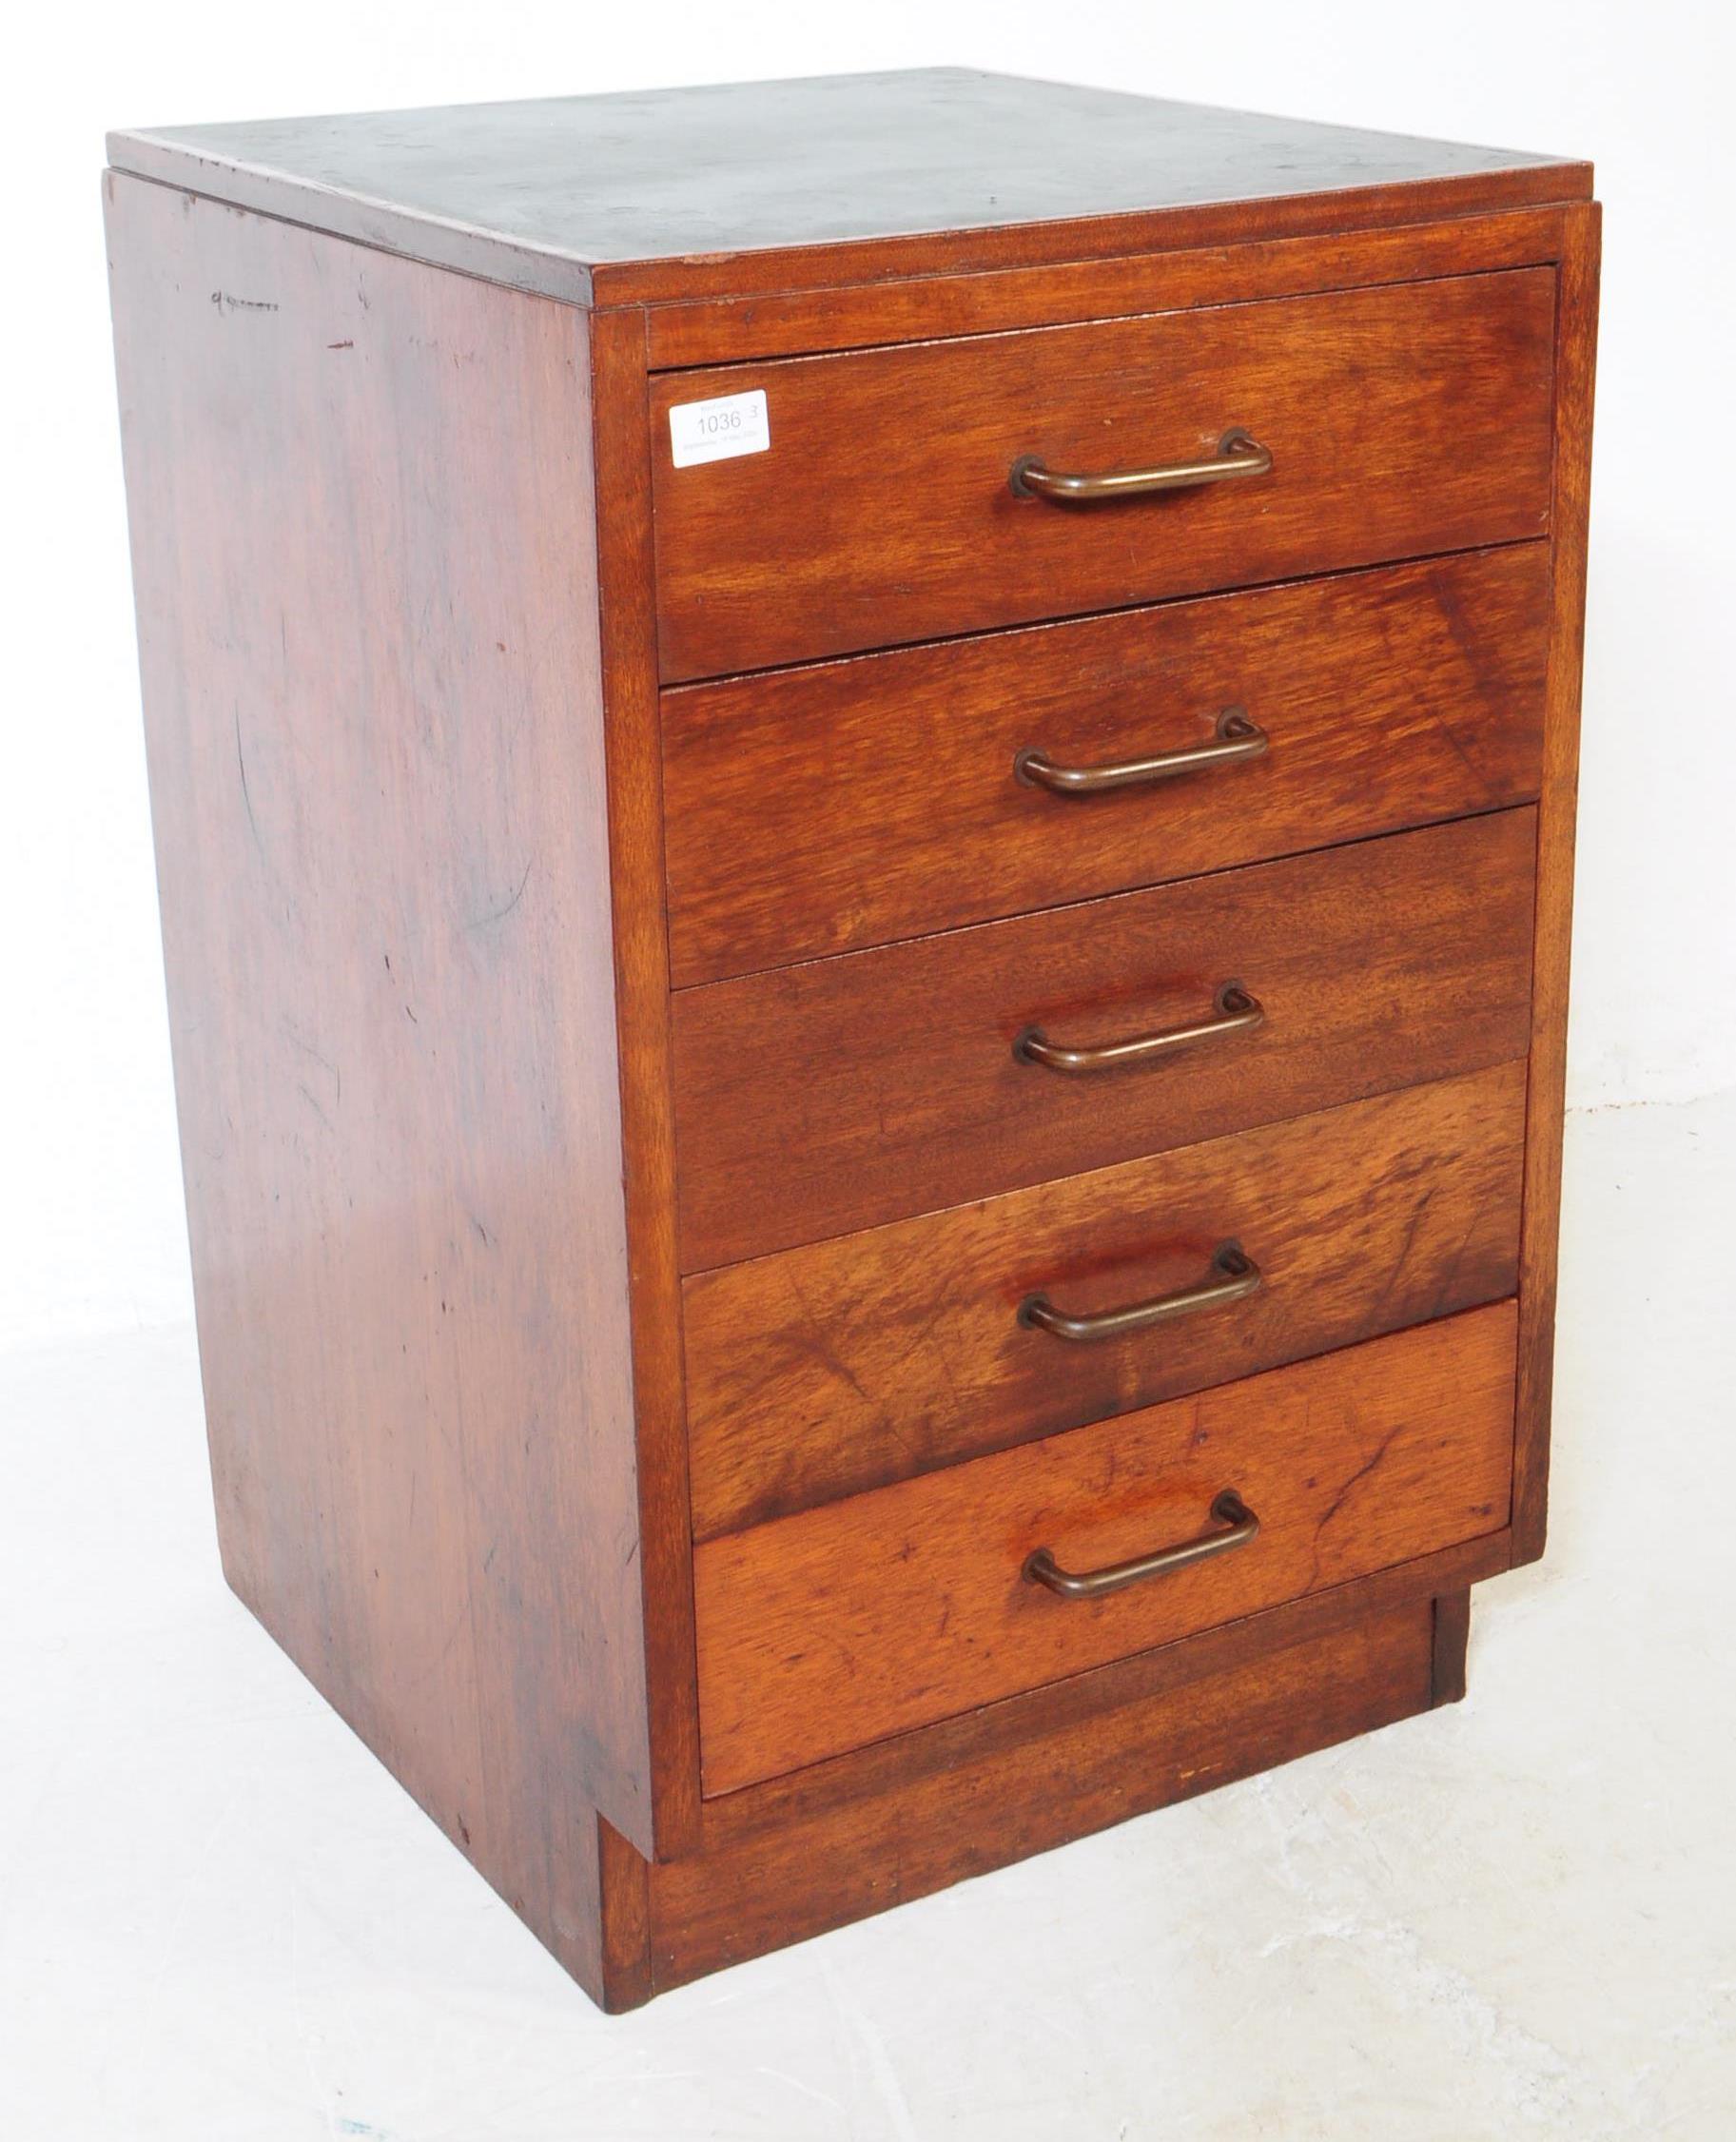 MINISTRY OF DEFENCE OAK PEDESTAL CHEST OF DRAWERS